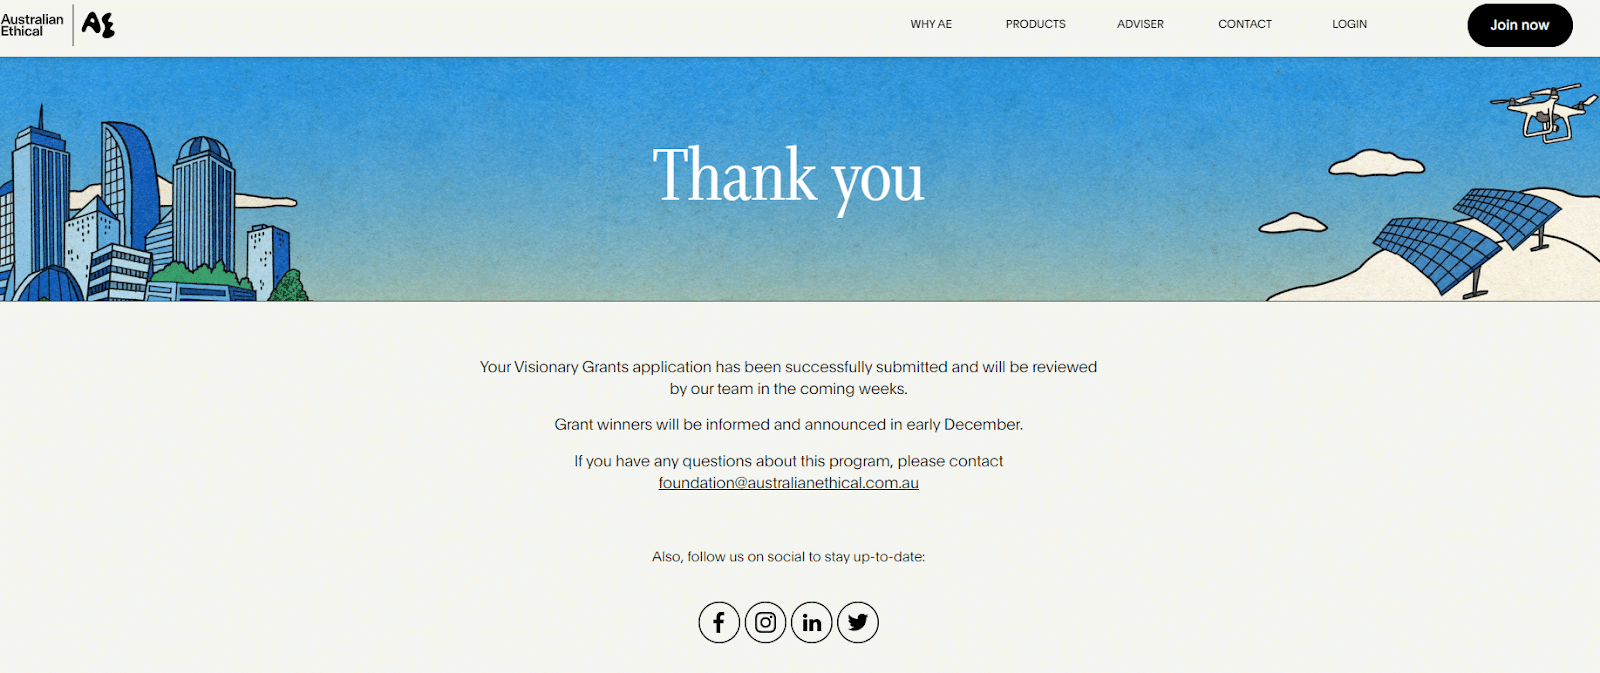 australian ethical thank you page example